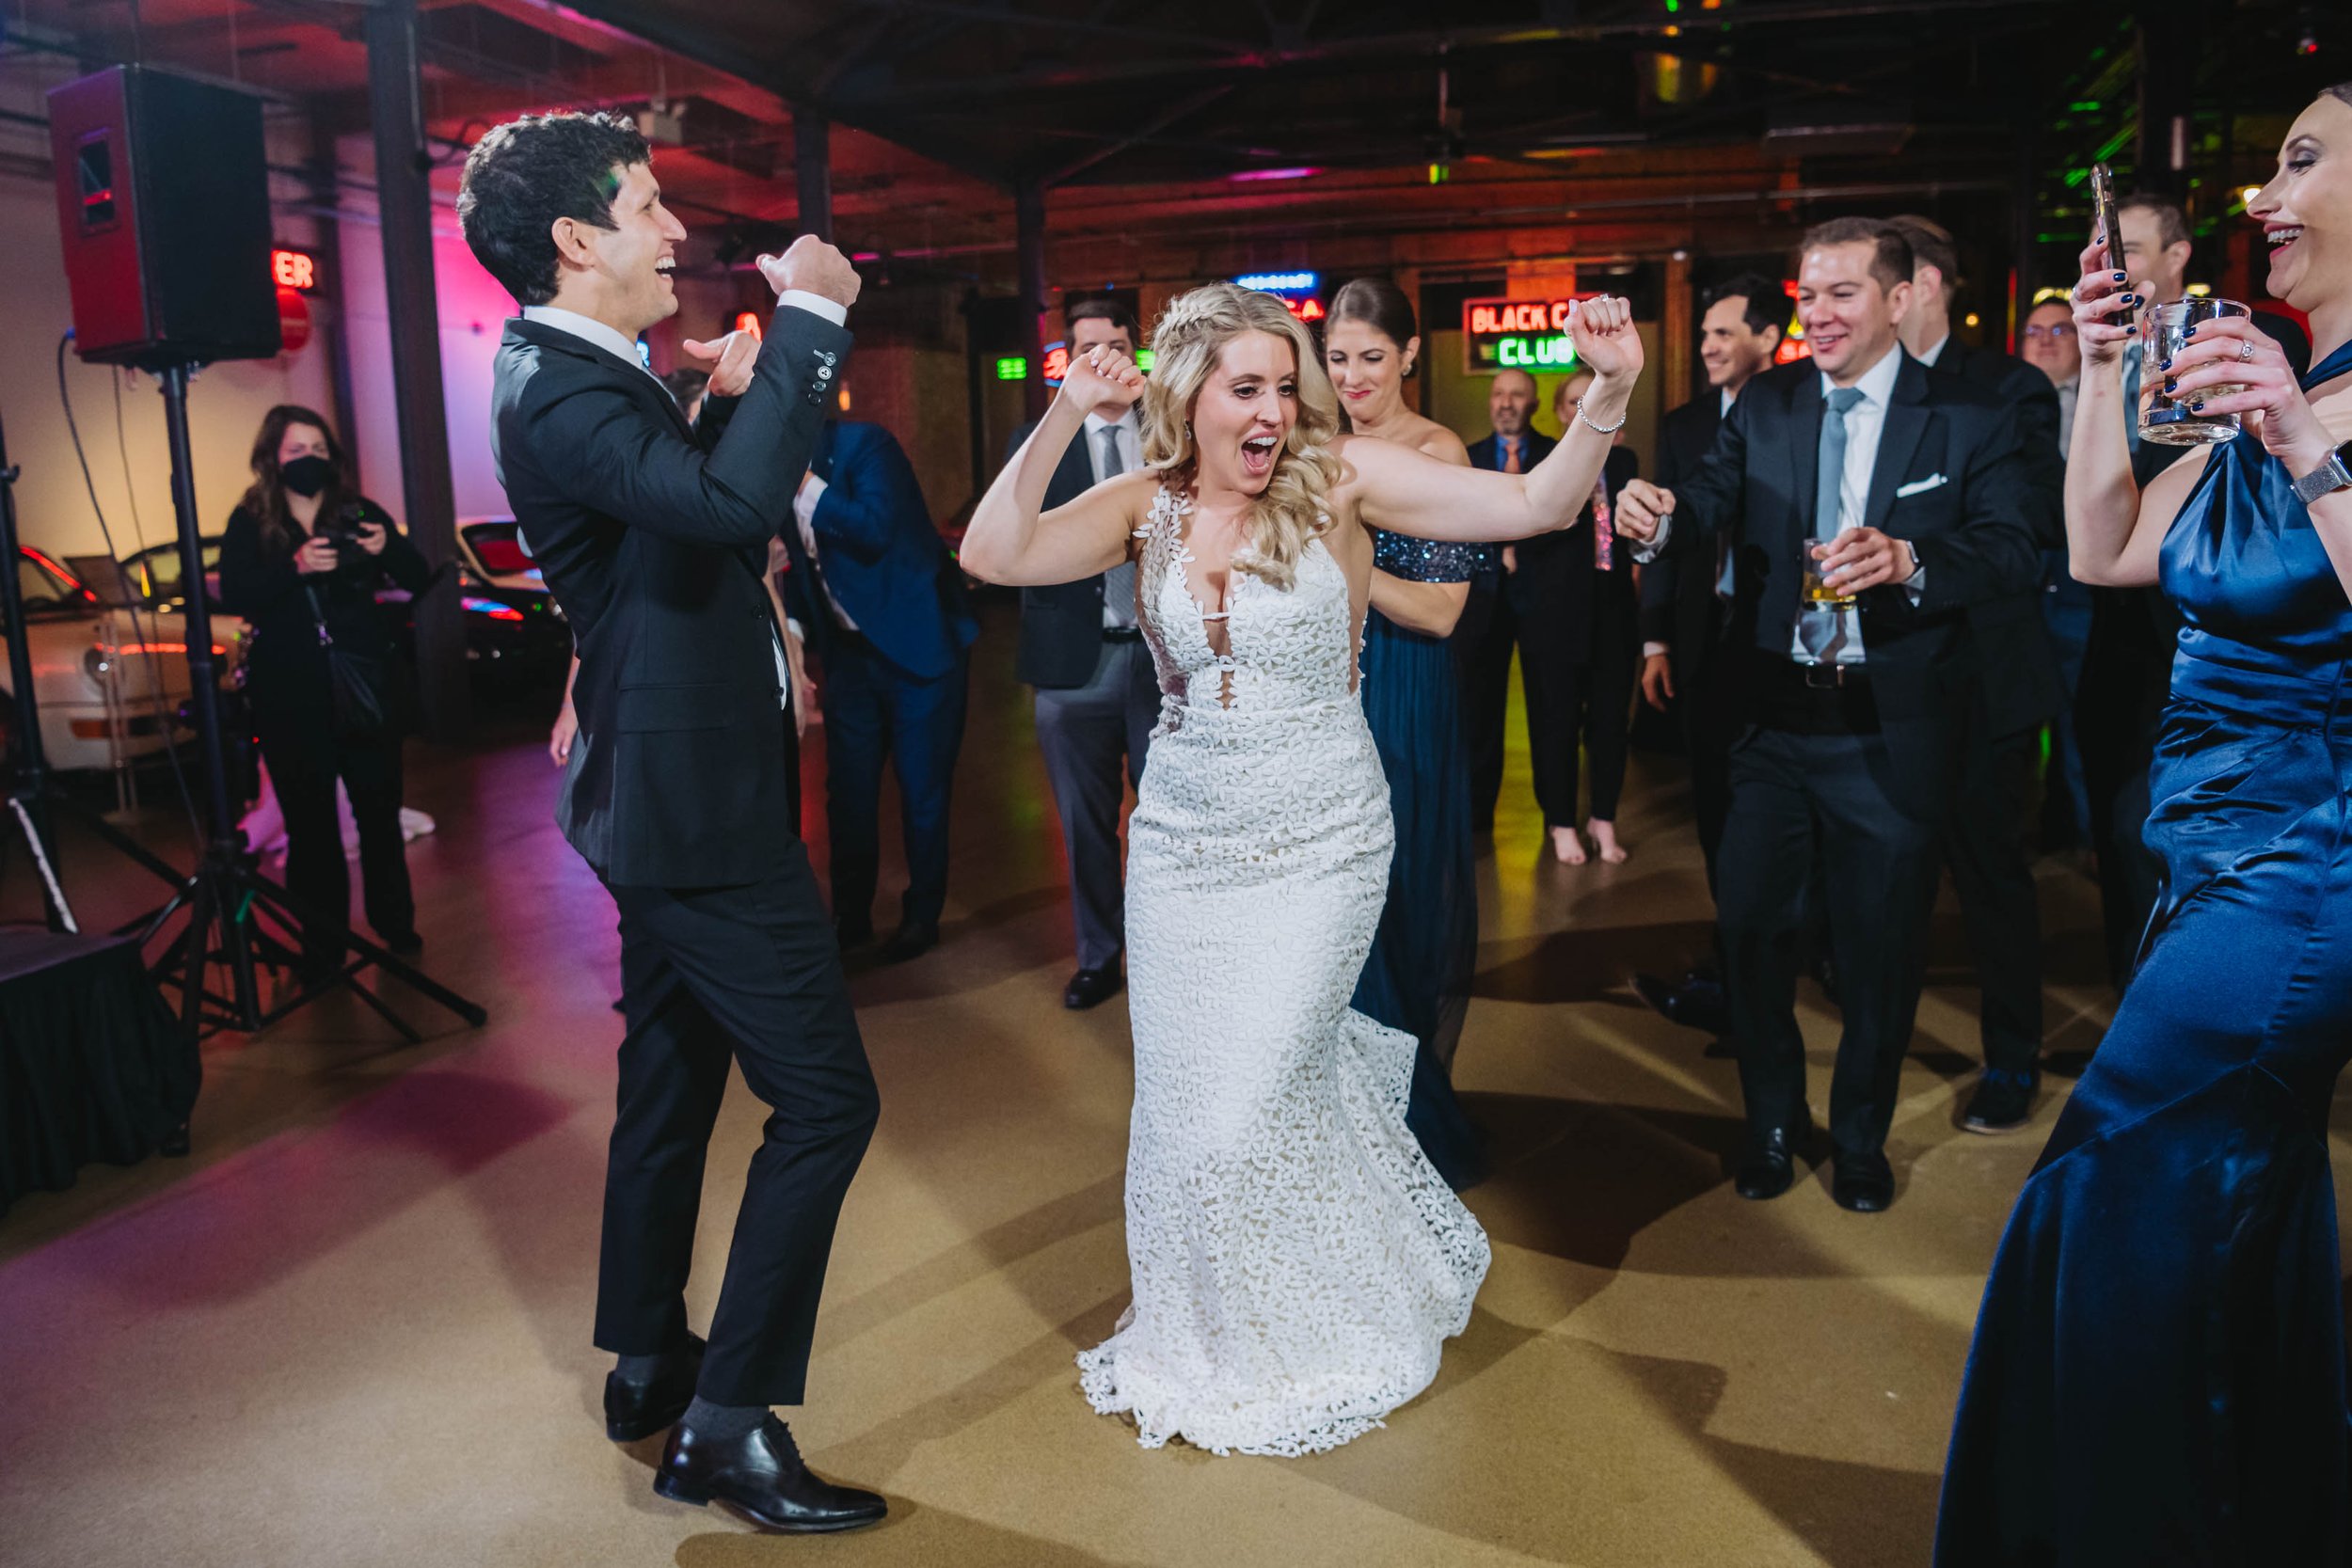 Chicago Wedding Photographer | Ravenswood Event Center | J. Brown Photography | bride and groom introduction